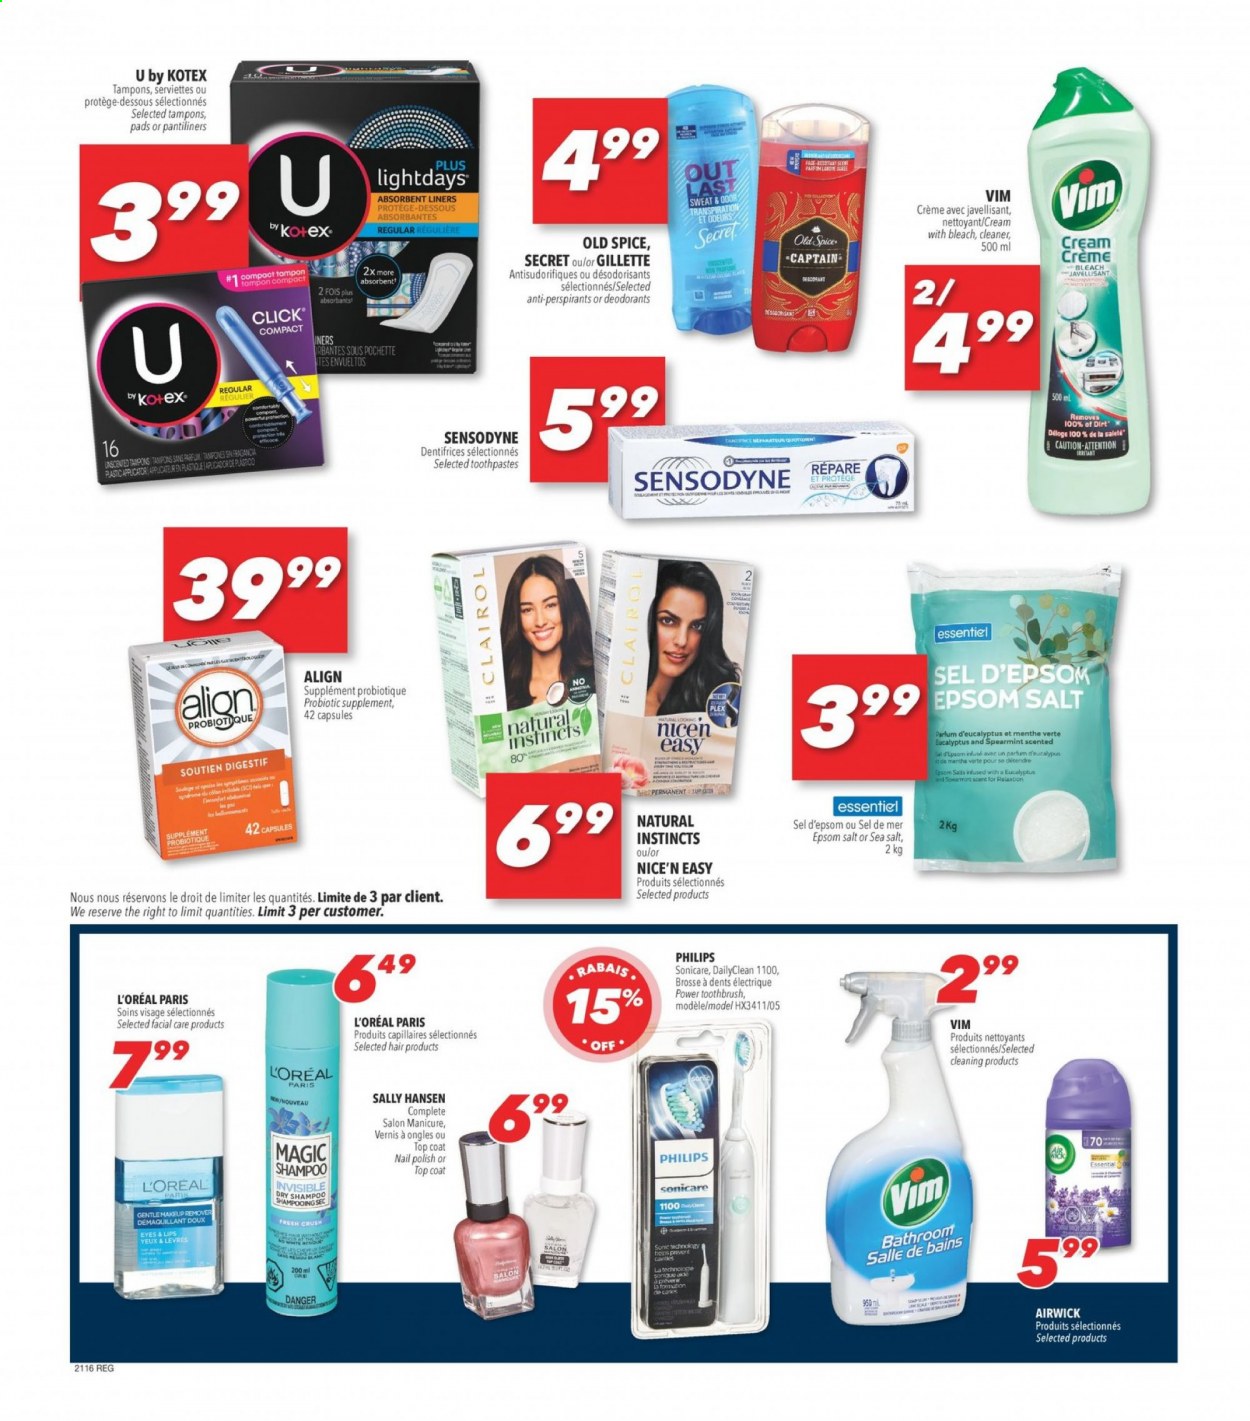 thumbnail - Circulaire Familiprix - 15 Avril 2021 - 21 Avril 2021 - Produits soldés - menthe, brosse à dents, shampooing, sel, Air Wick, Gillette, Old Spice, Sally Hansen, Sensodyne, Philips, Sonicare, vernis à ongles. Page 8.